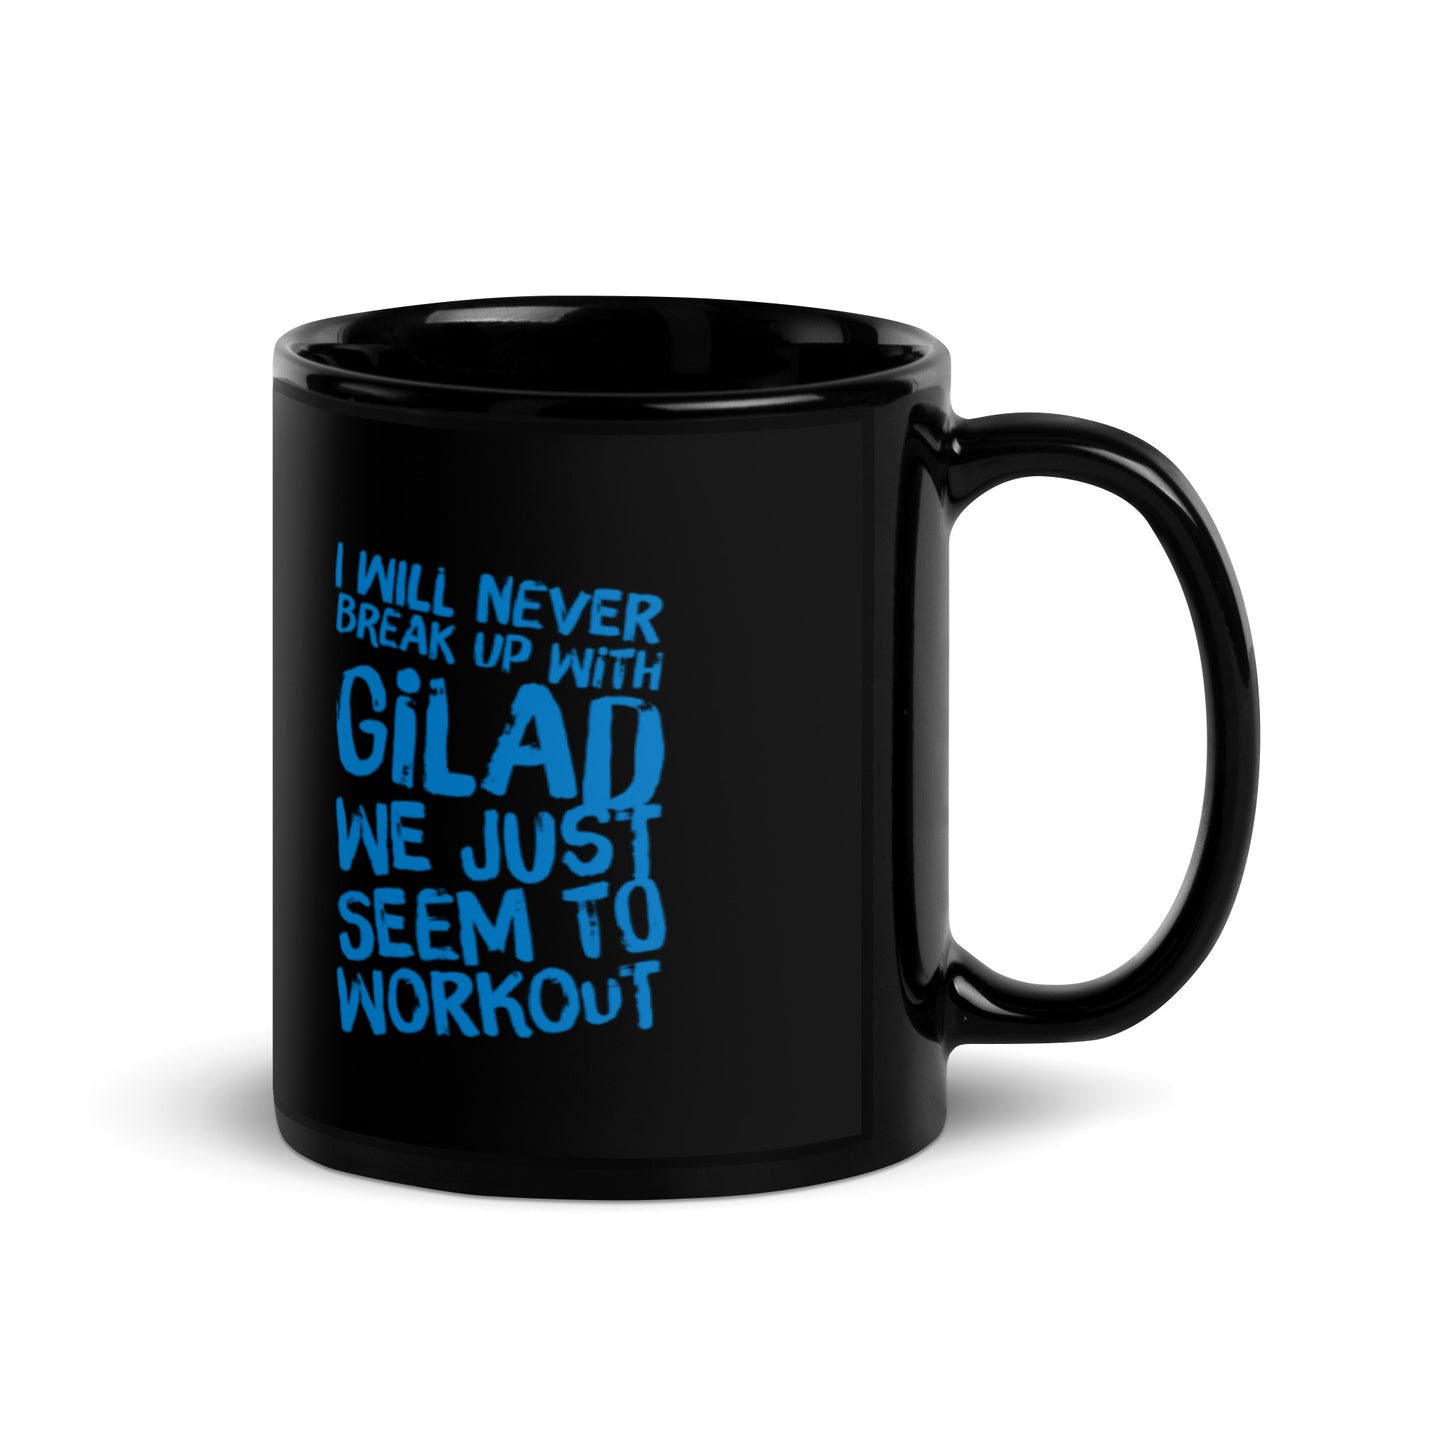 I will Never Break Up With Gilad We just seem to workout Black Glossy Mug